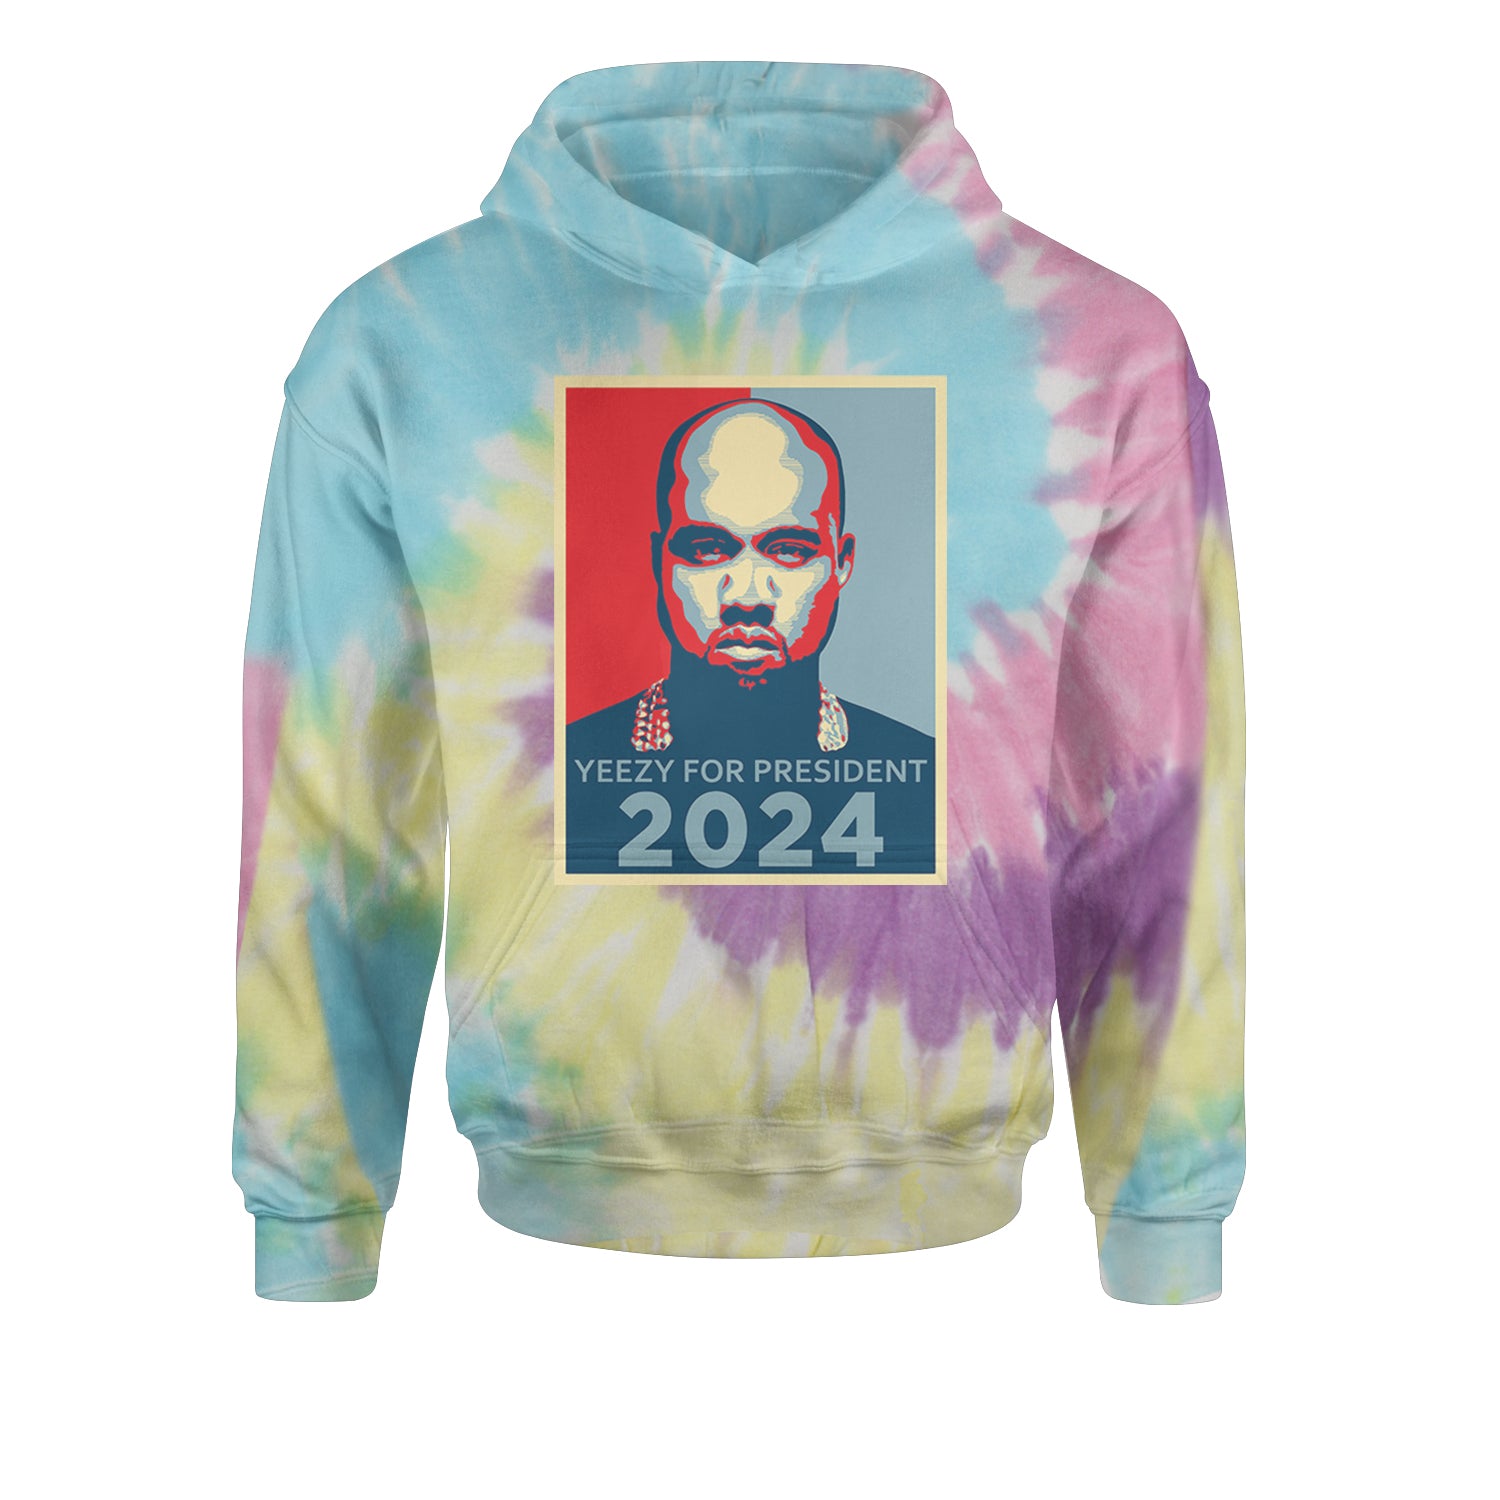 Yeezus For President Vote for Ye Youth-Sized Hoodie Tie-Dye Jelly Bean